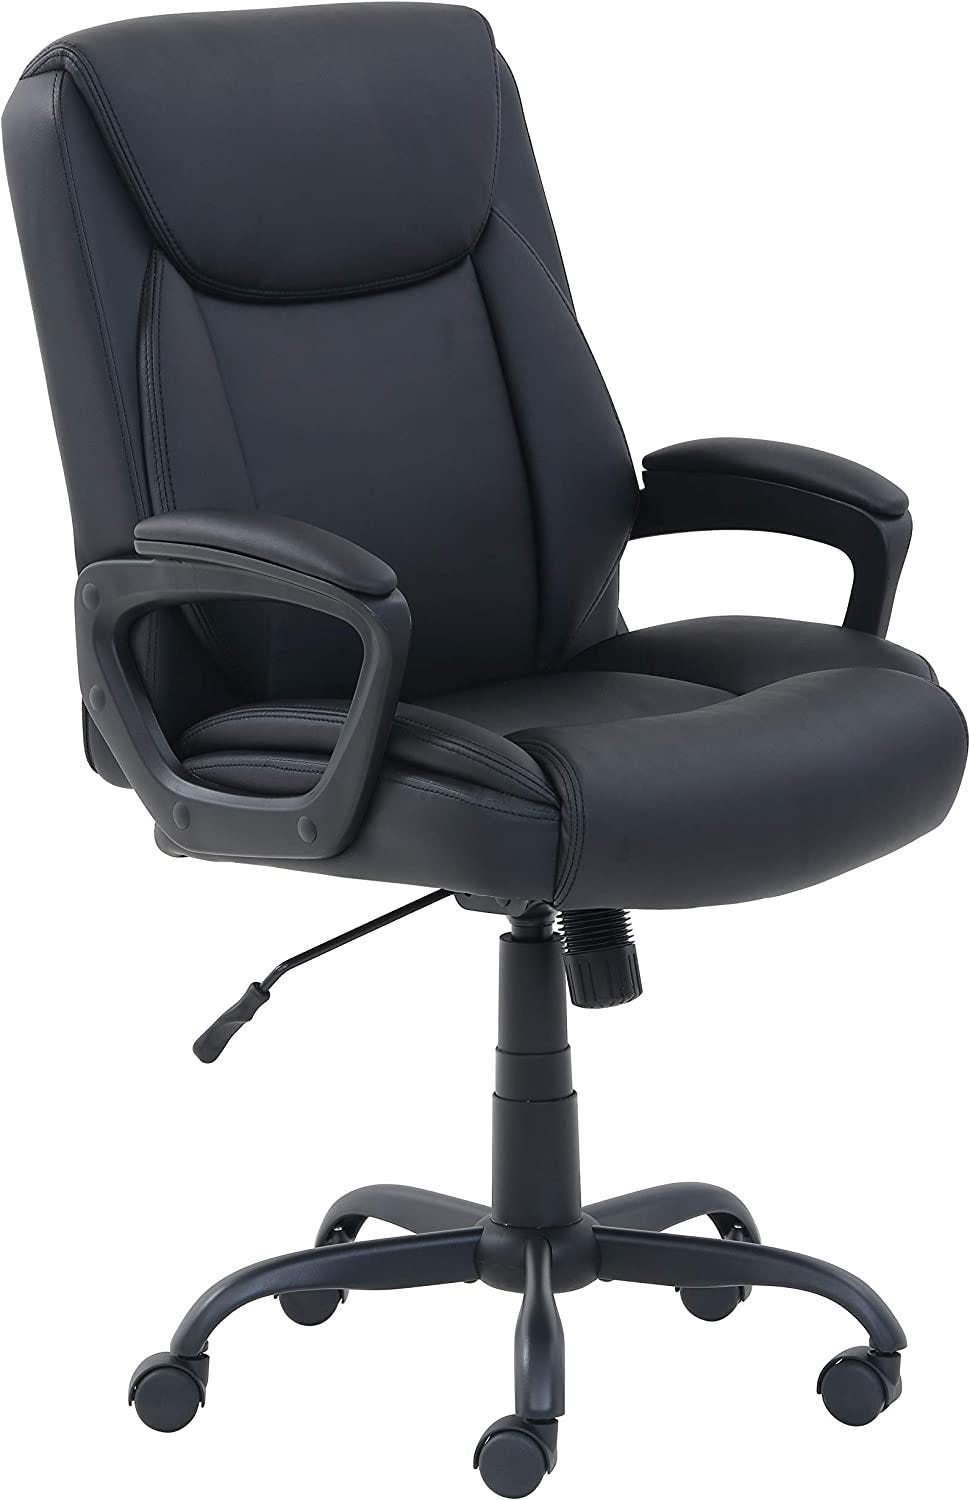 Bought the Sihoo M18 chair from . Didn't like the seat depth